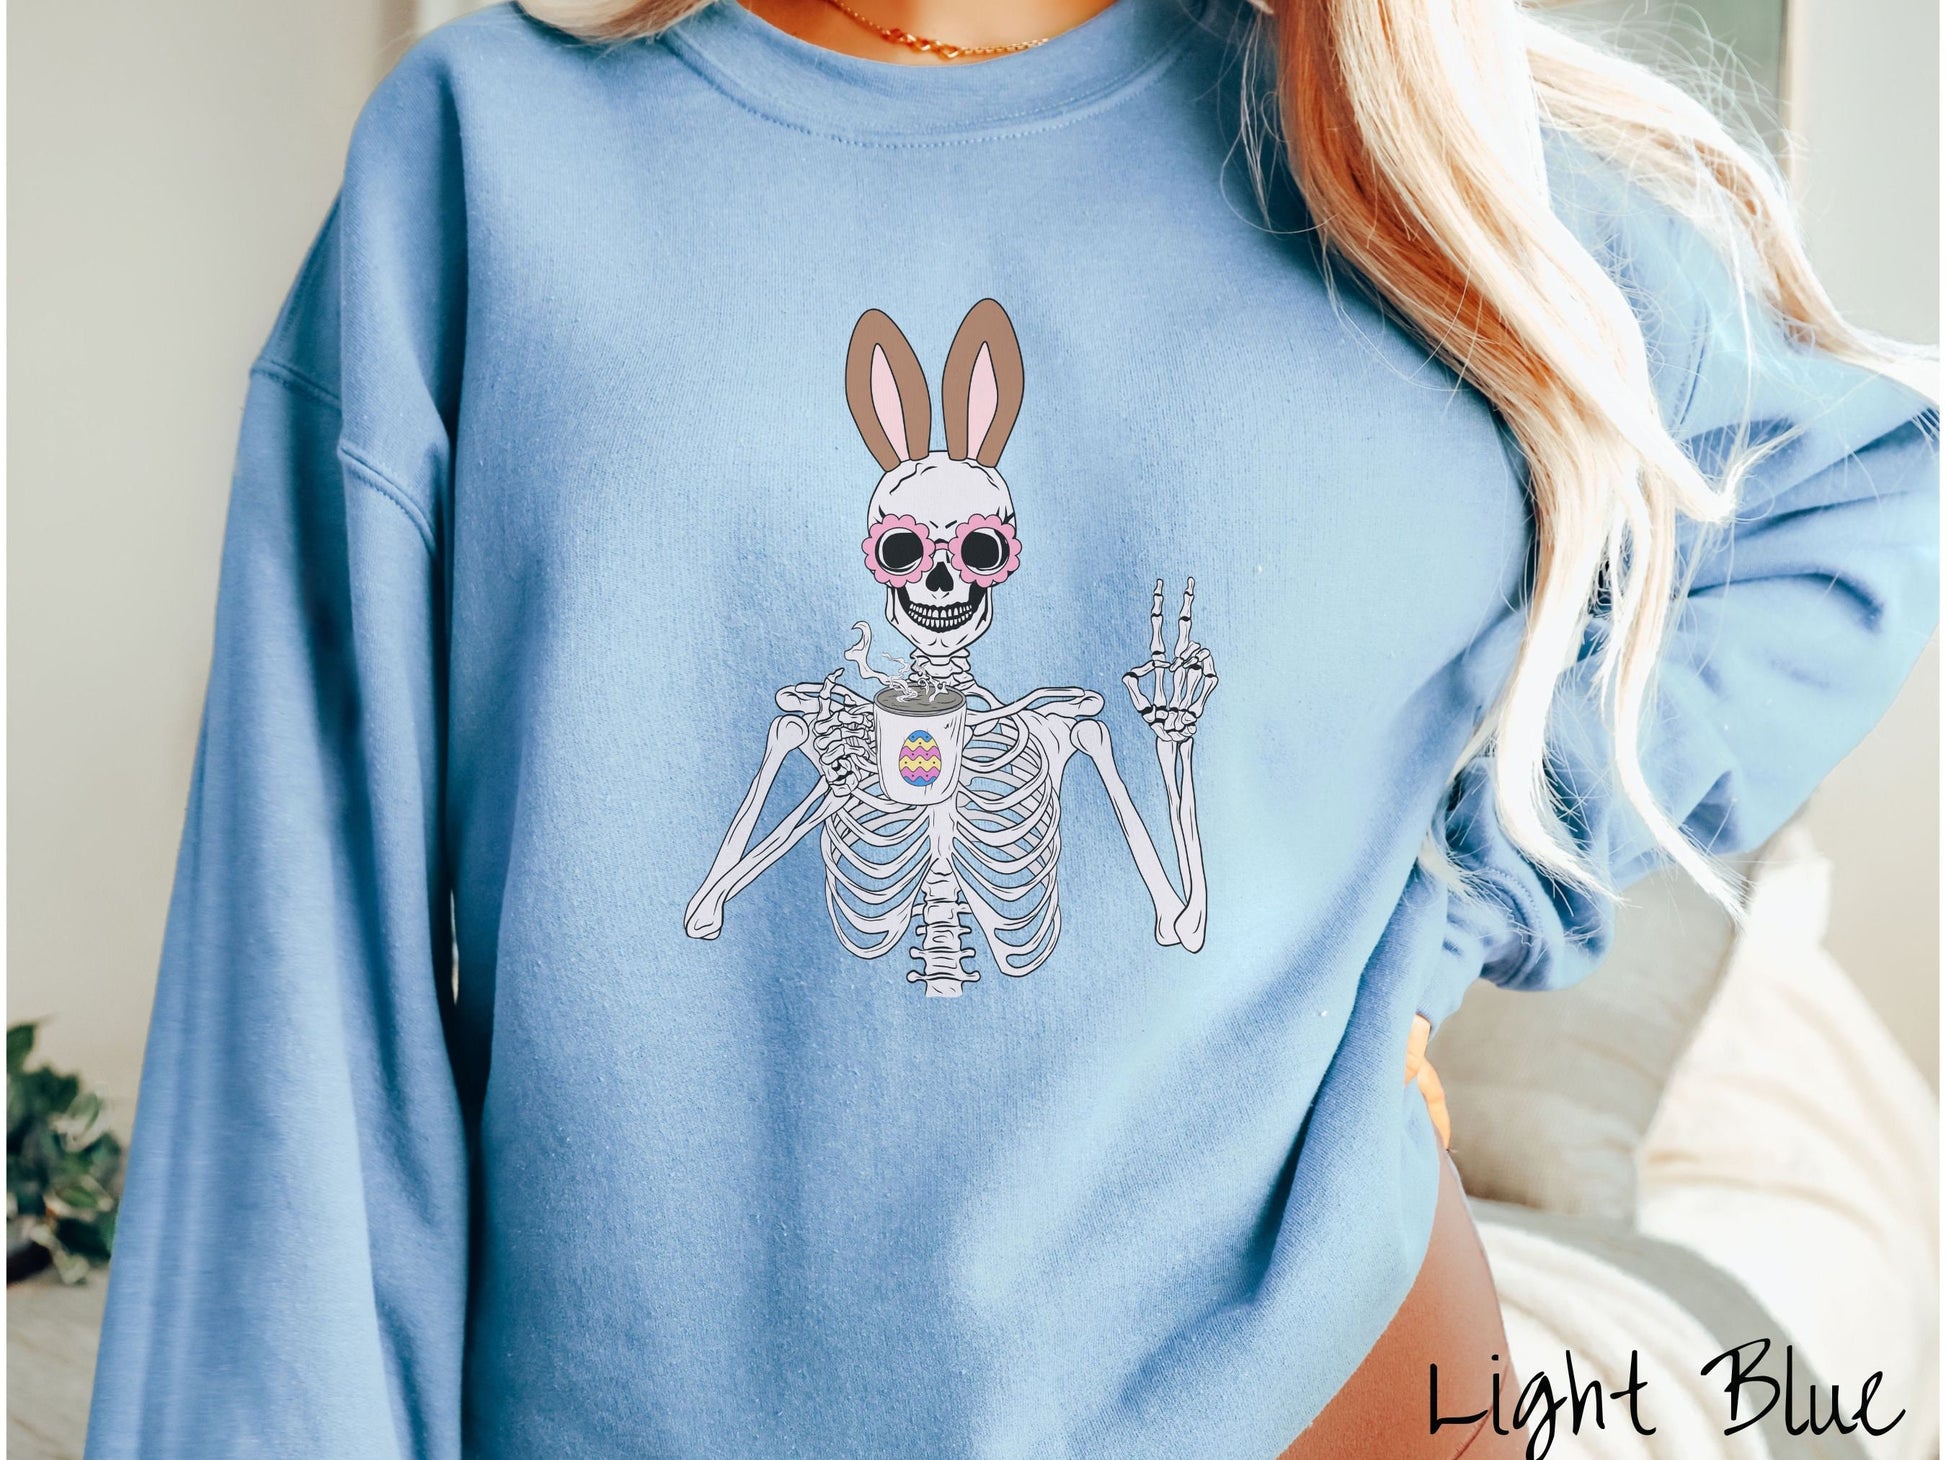 A woman wearing a cute, vintage light blue colored sweatshirt with a pink-toned skeleton wearing pink glasses and brown bunny ears, holding a cup of coffee and holding up a peace sign with the other hand. The coffee cup has a colorful Easter egg.